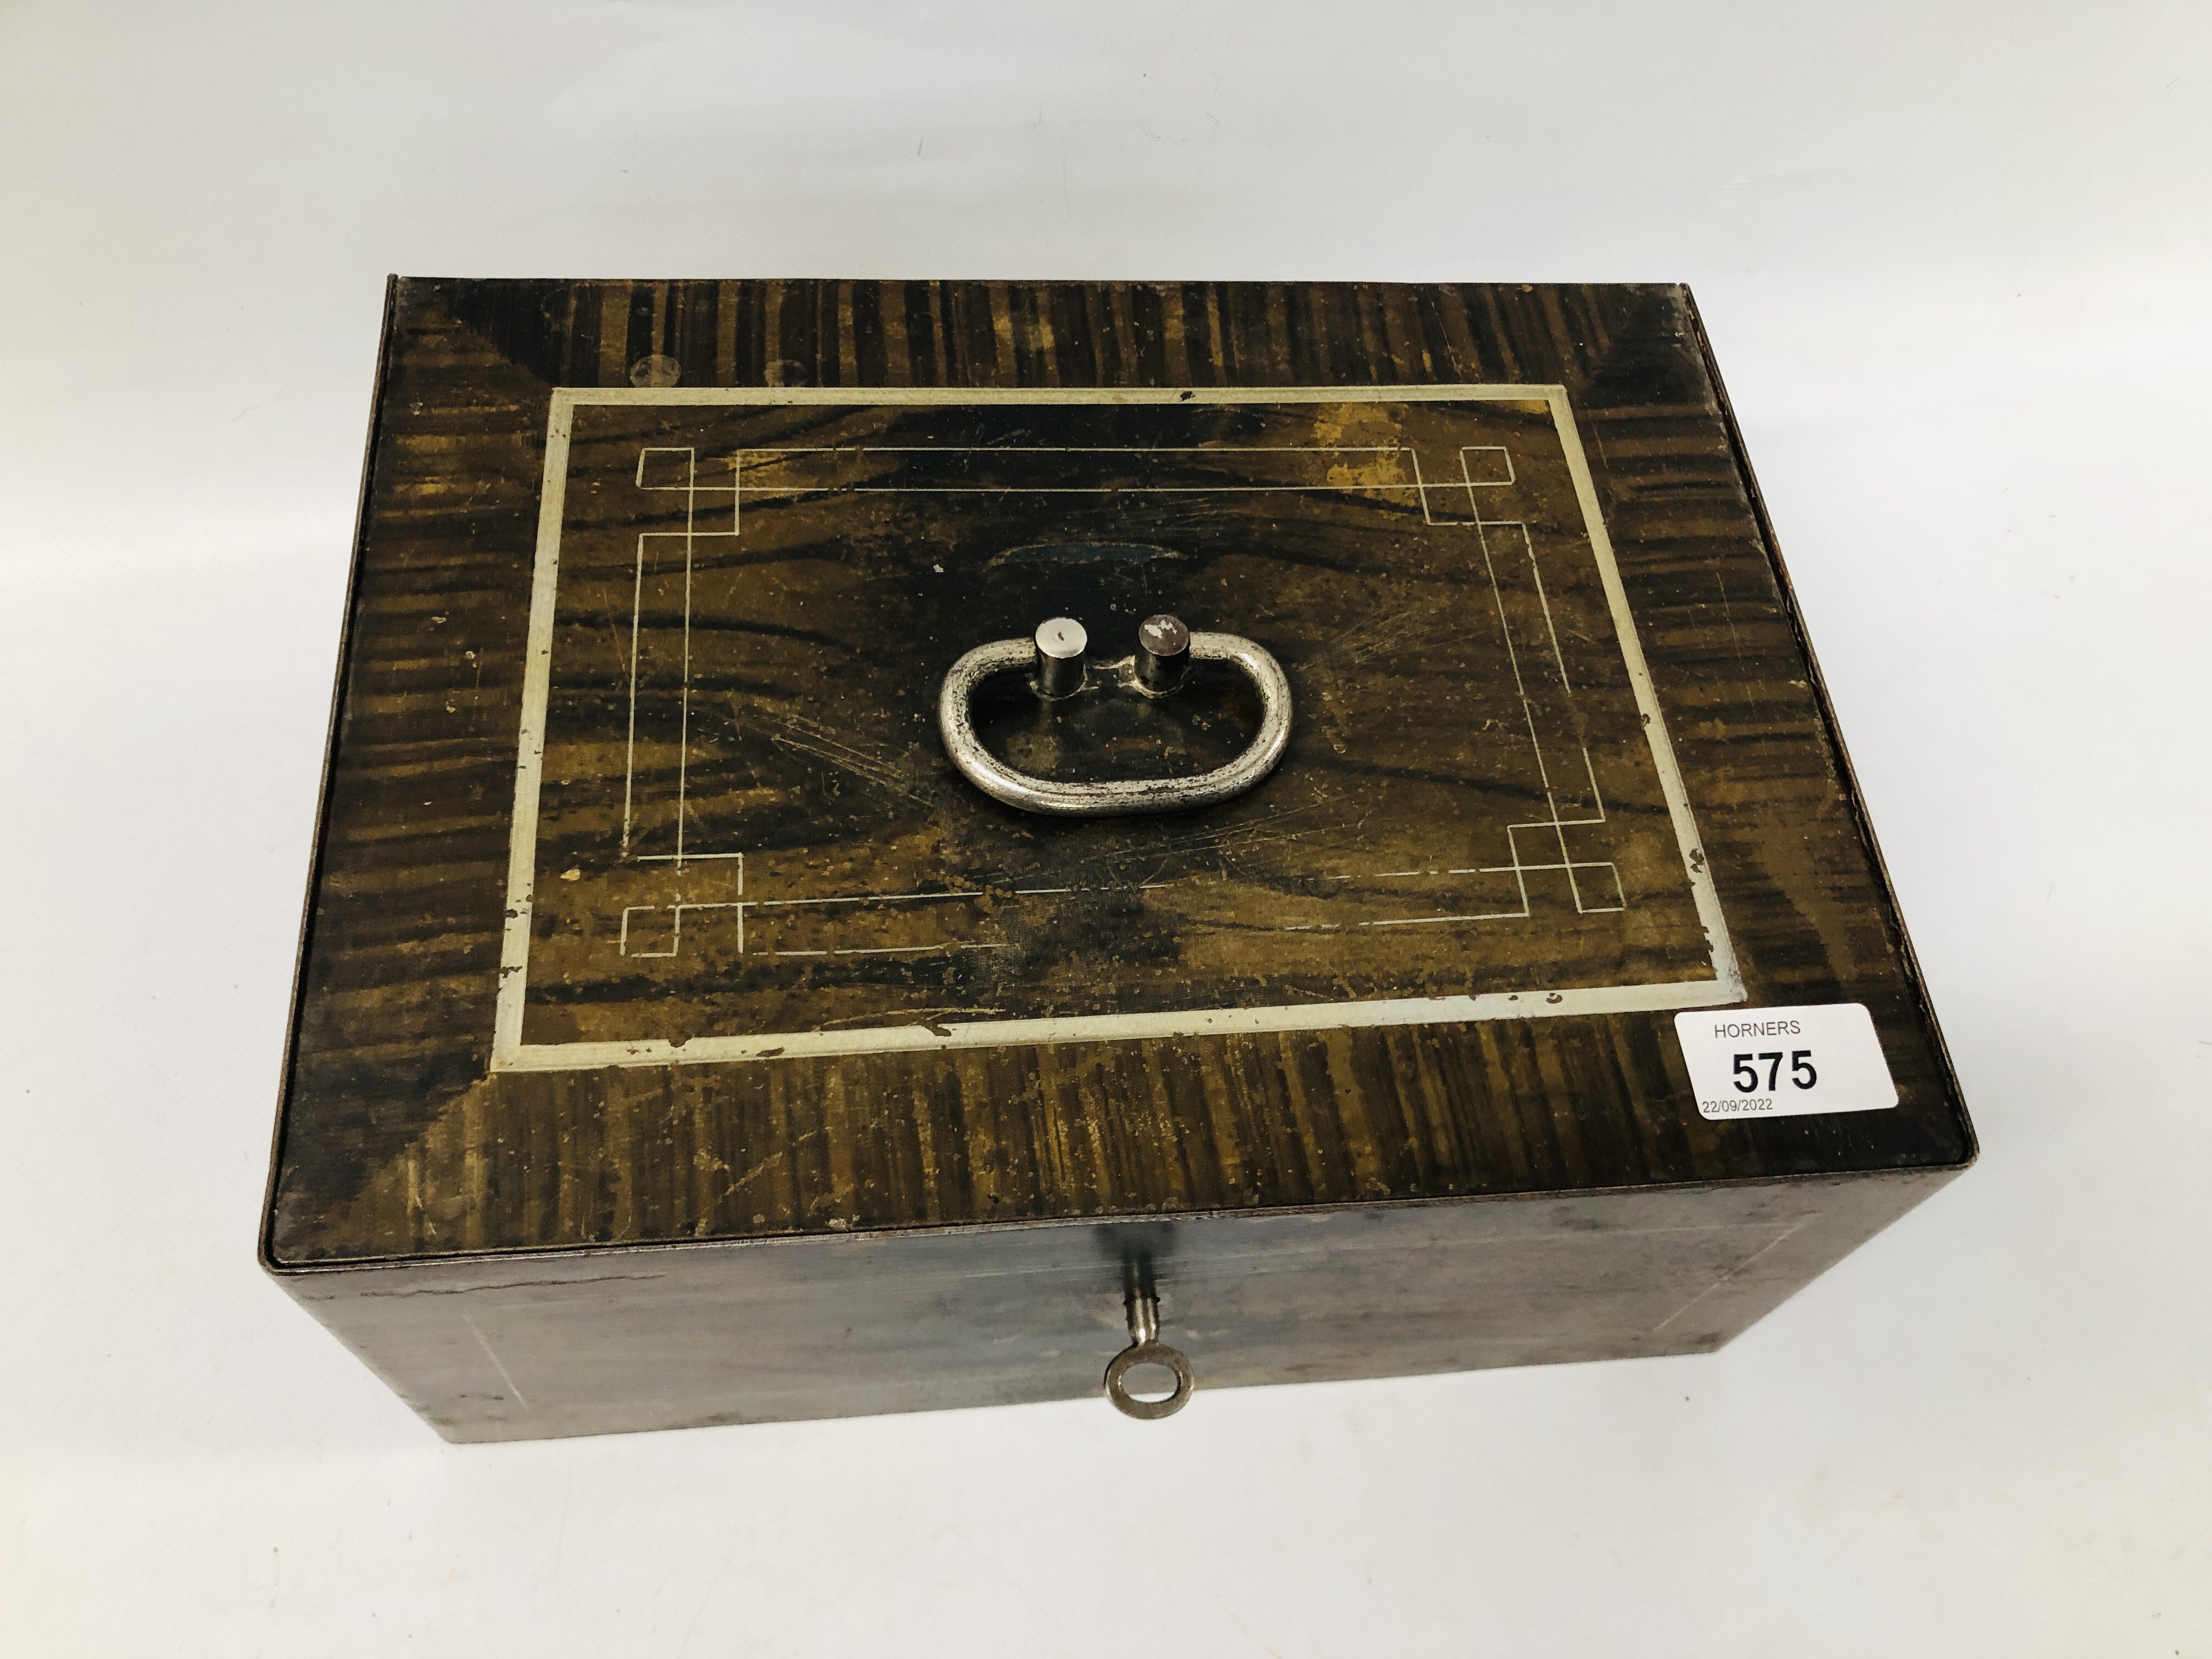 AN ANTIQUE METAL SAFE BOX COMPLETE WITH KEY WIDTH 30CM. DEPTH 23CM. HEIGHT 12CM. - Image 2 of 5